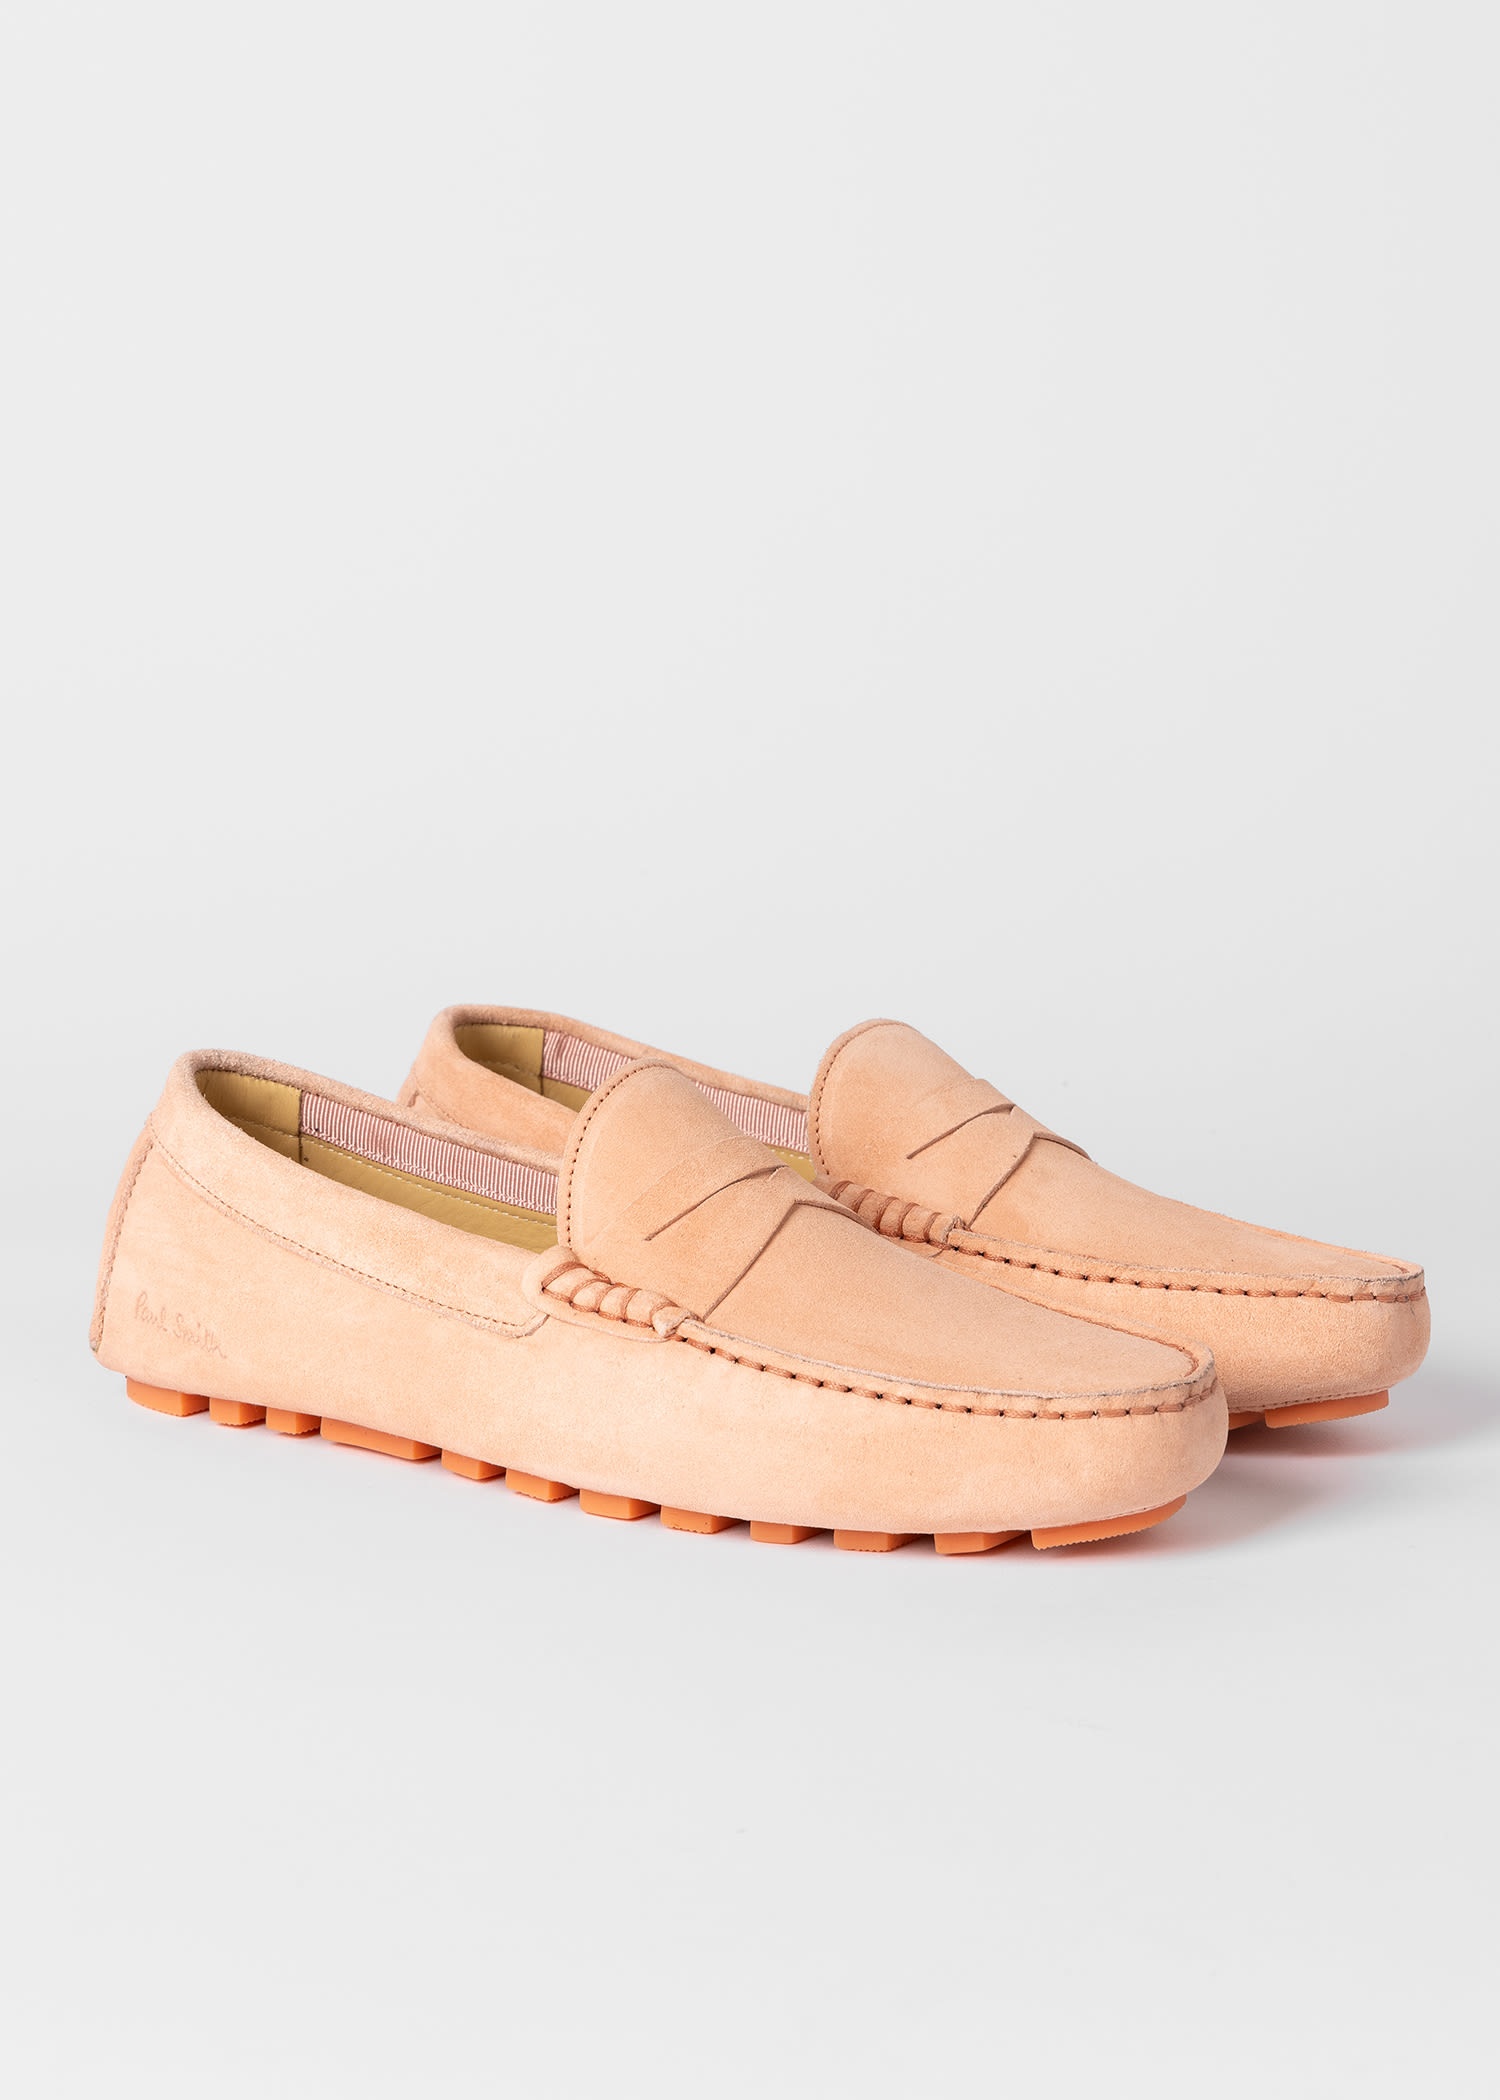 Peach Suede 'Tulsa' Driving Loafers - 3